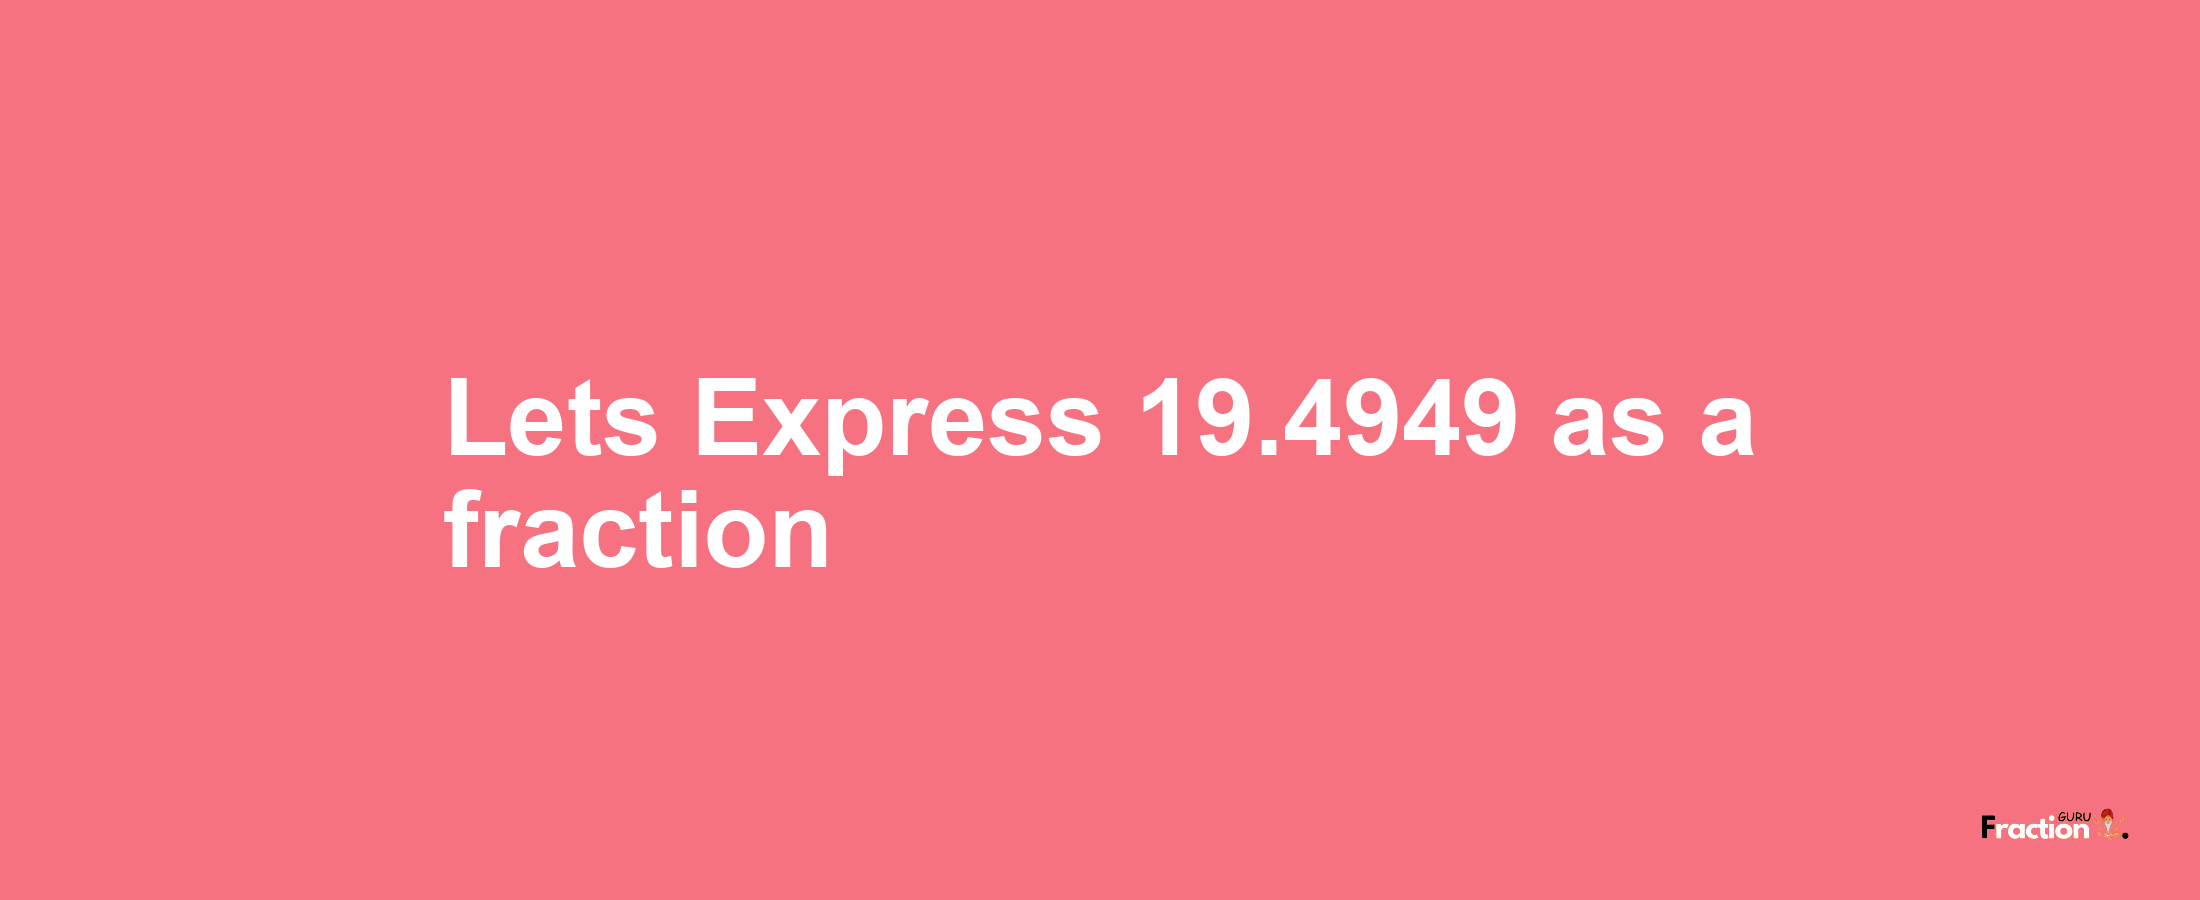 Lets Express 19.4949 as afraction